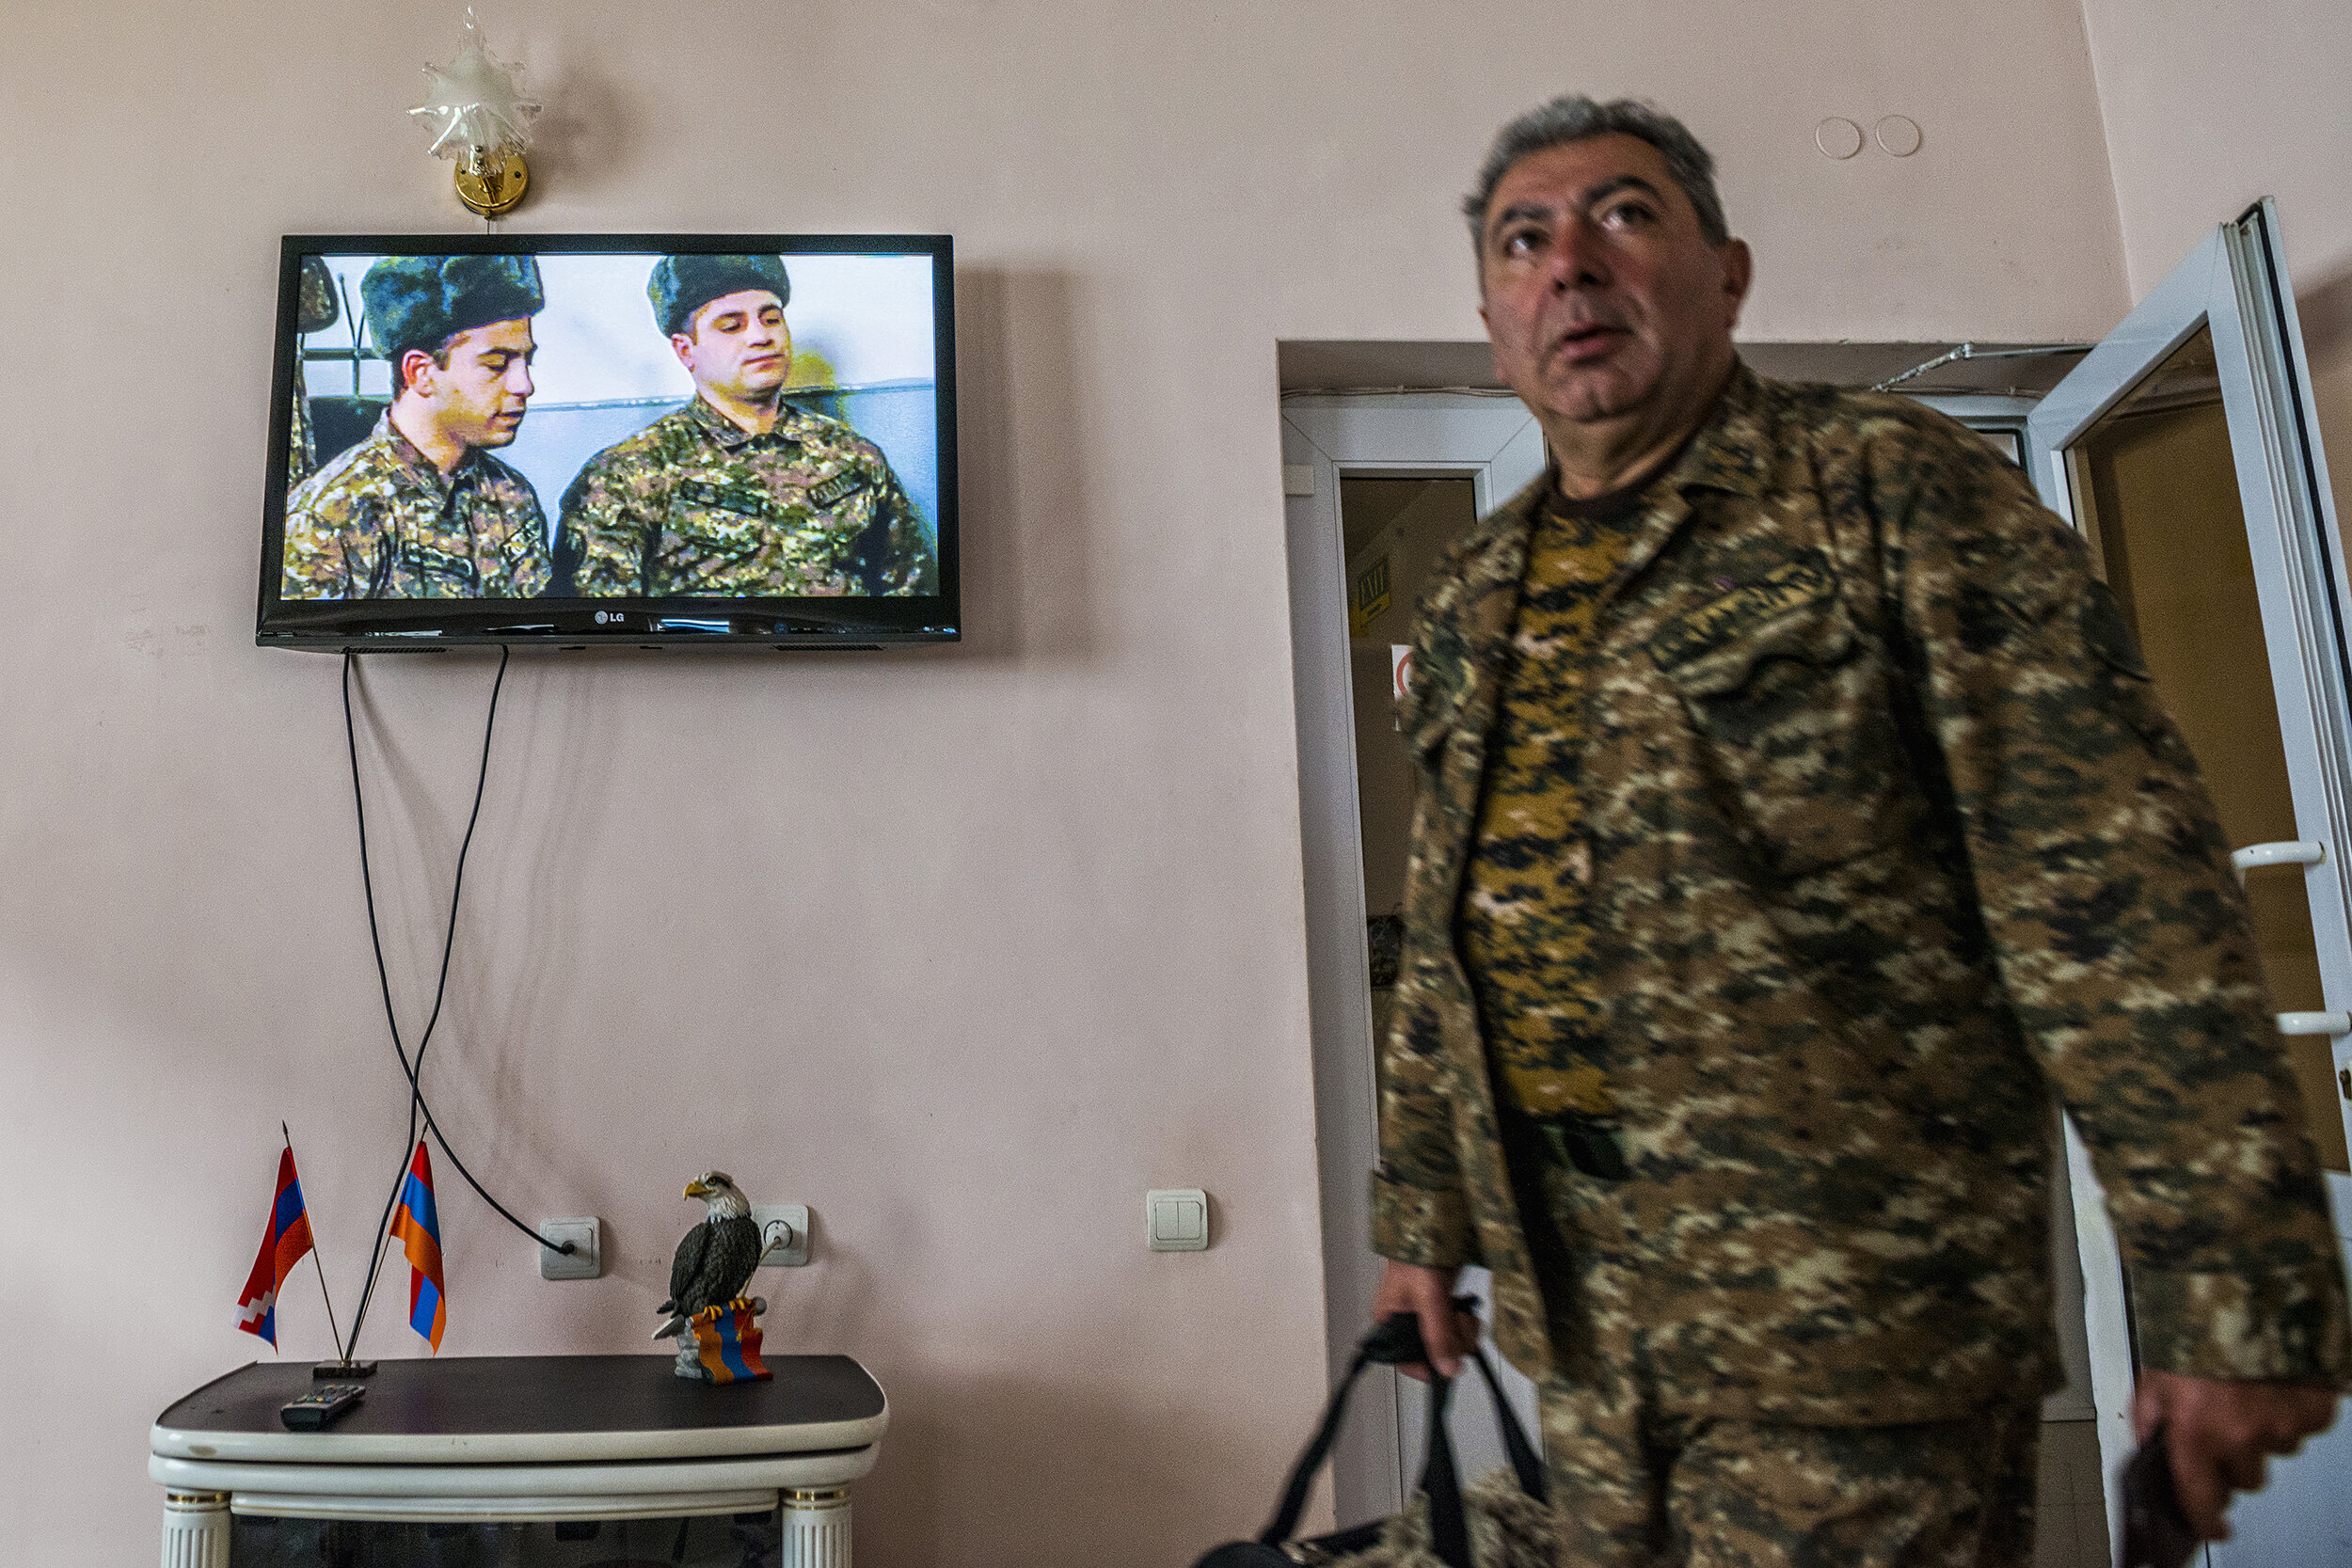  An NKR soldier exits the Nairi Hotel in Stepanakert, Nagorno-Karabakh while a TV plays a military film above the flags of Armenia and the NKR, their denizens inextricably linked. 